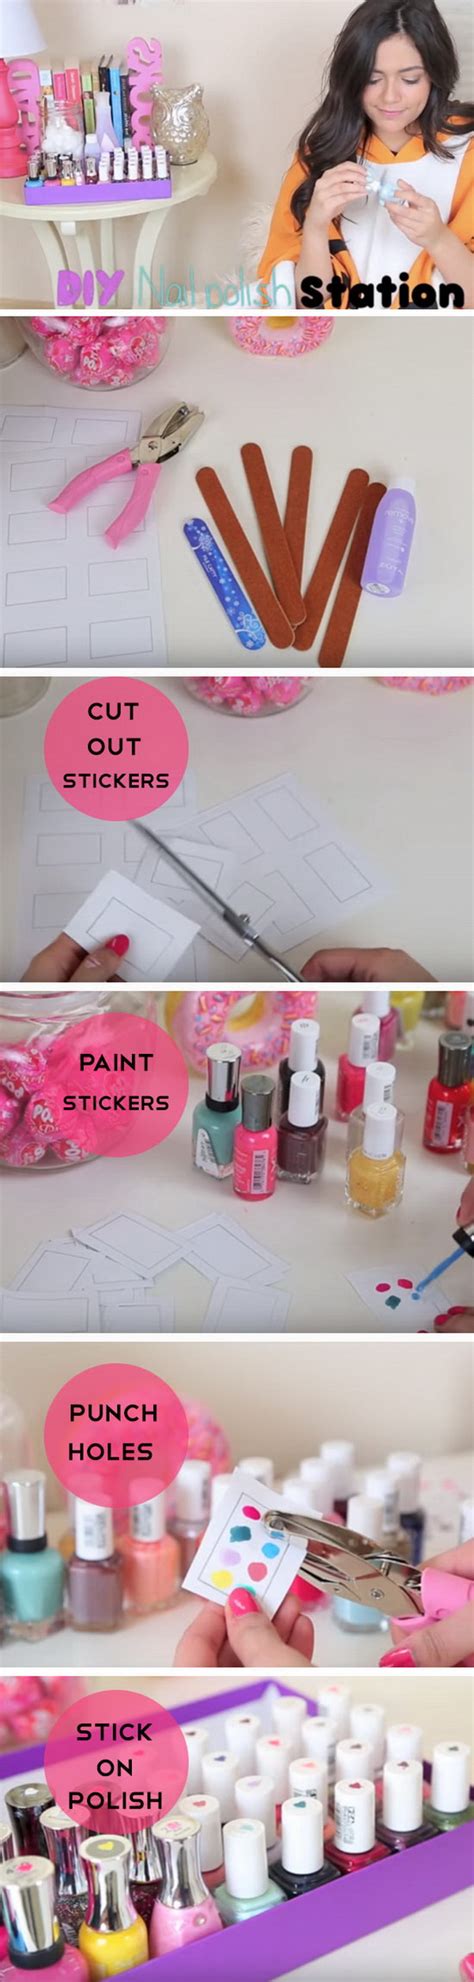 30 Cool Diy Projects For Teenage Girls For Creative Juice